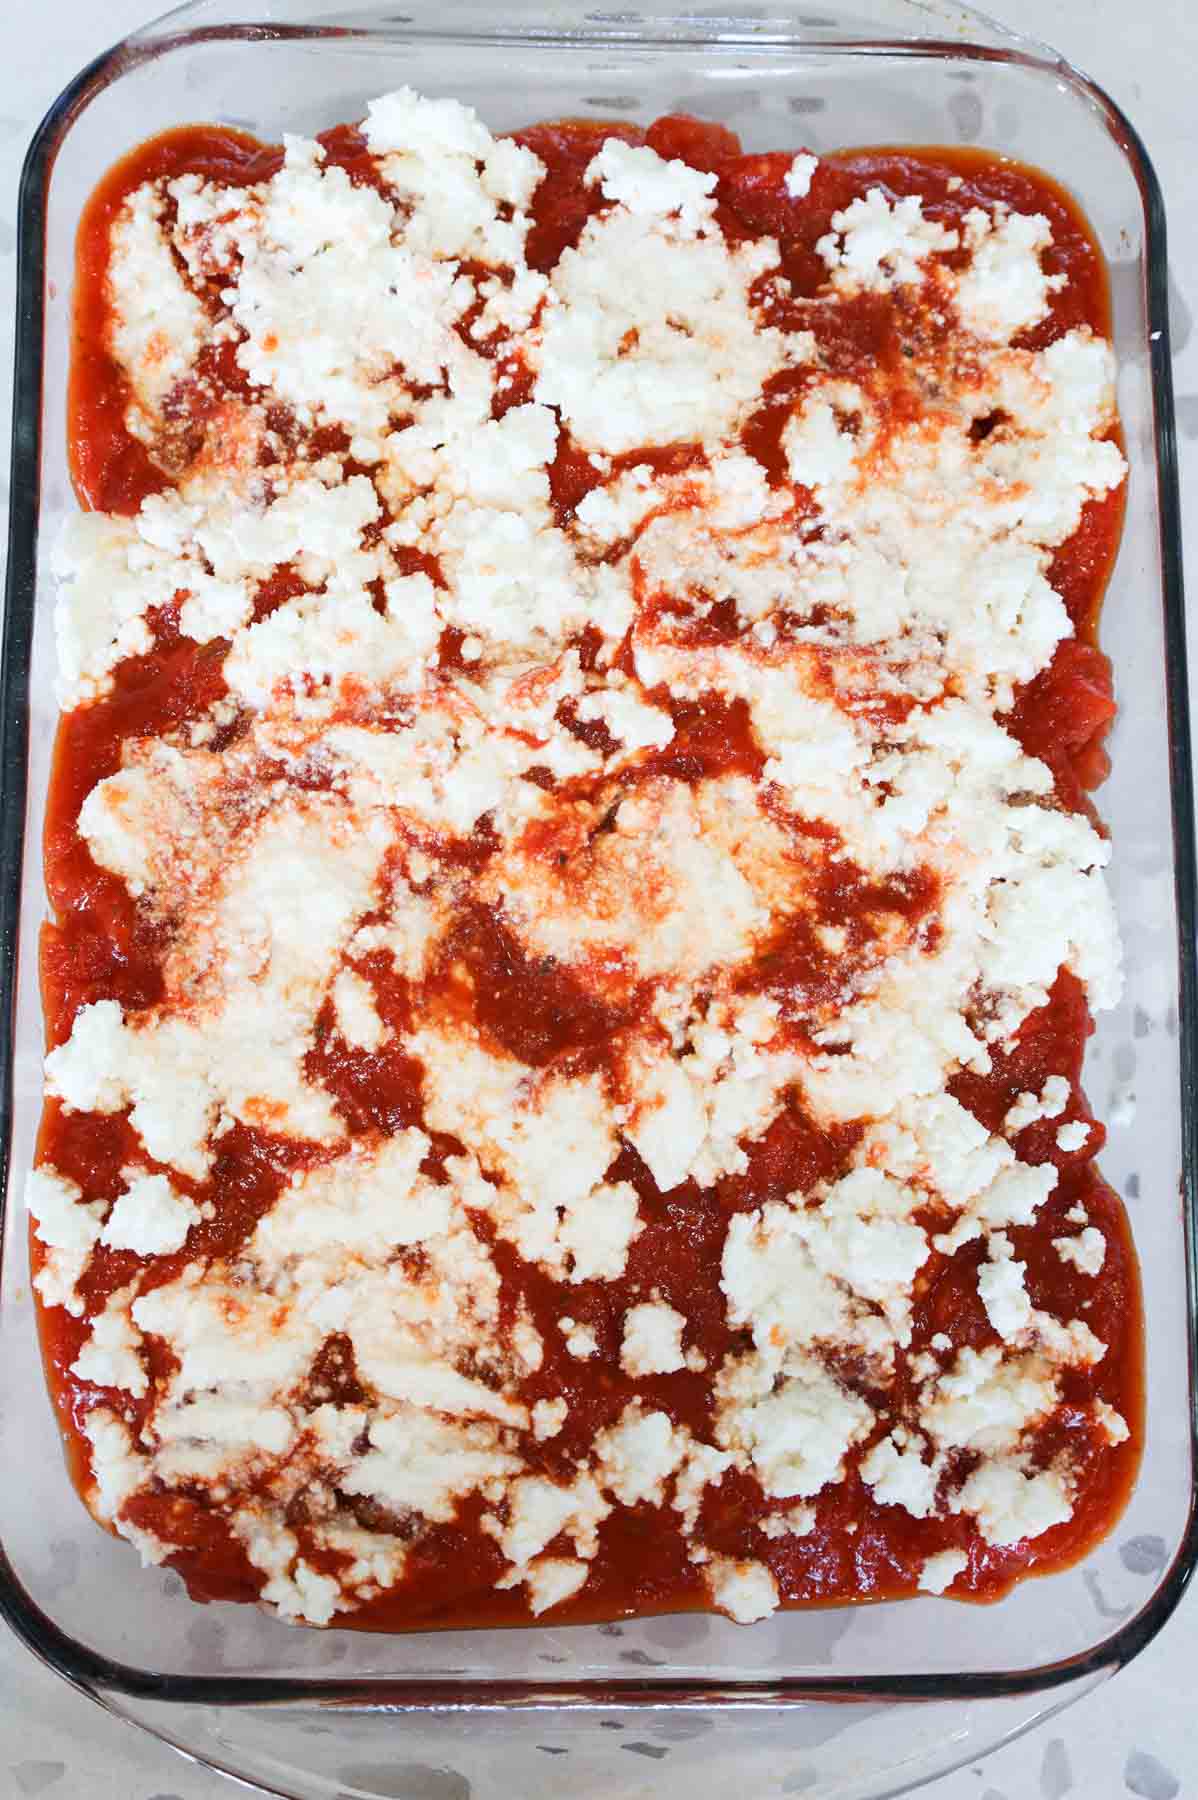 ricotta and marinara on top of meatballs in a baking dish